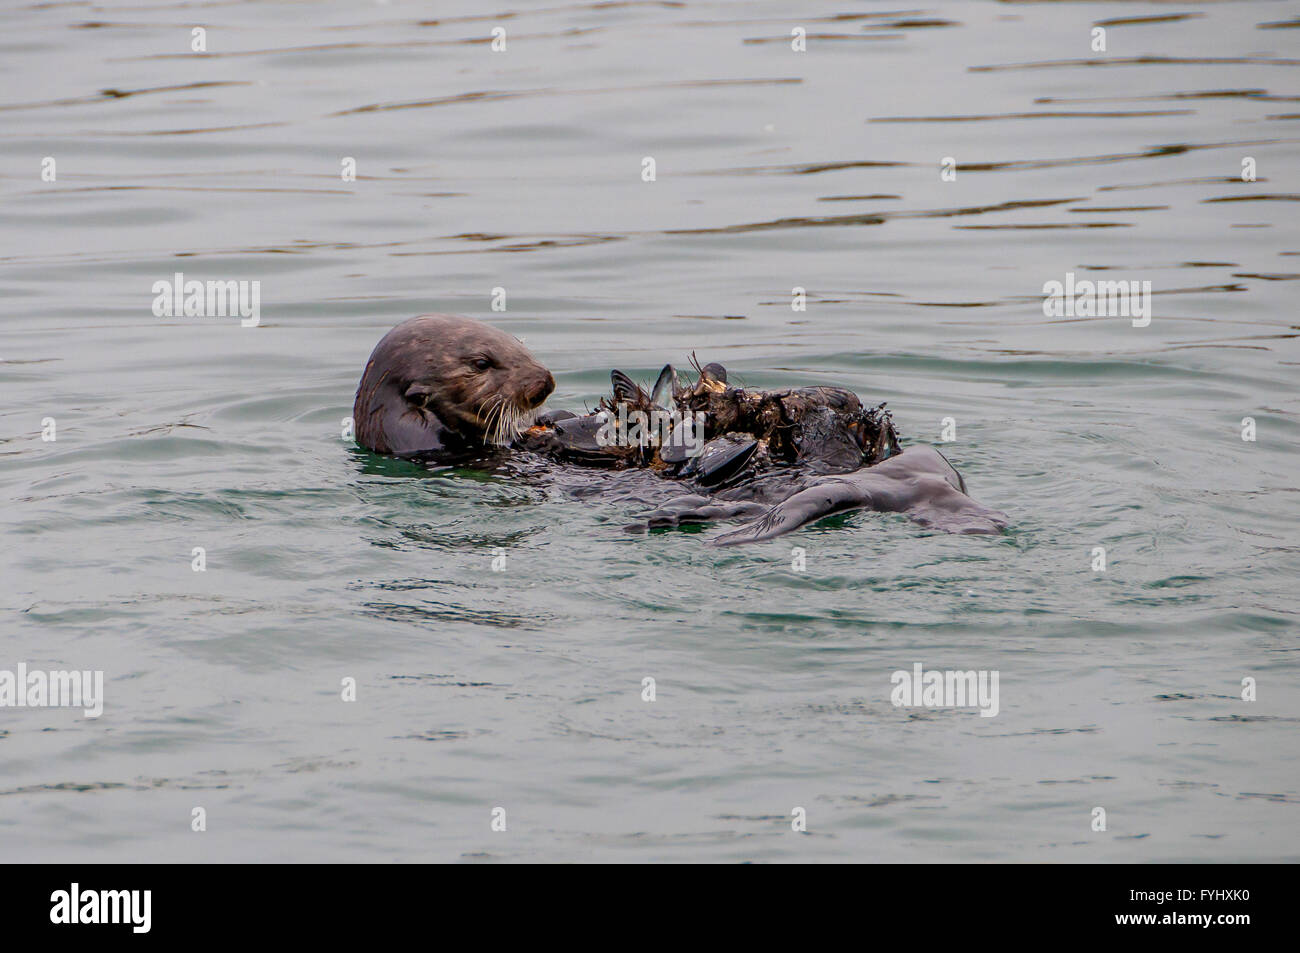 Young California sea otter in water with mussel shells on belly at Morro Bay; sea otter eating mussels while floating on back. Stock Photo